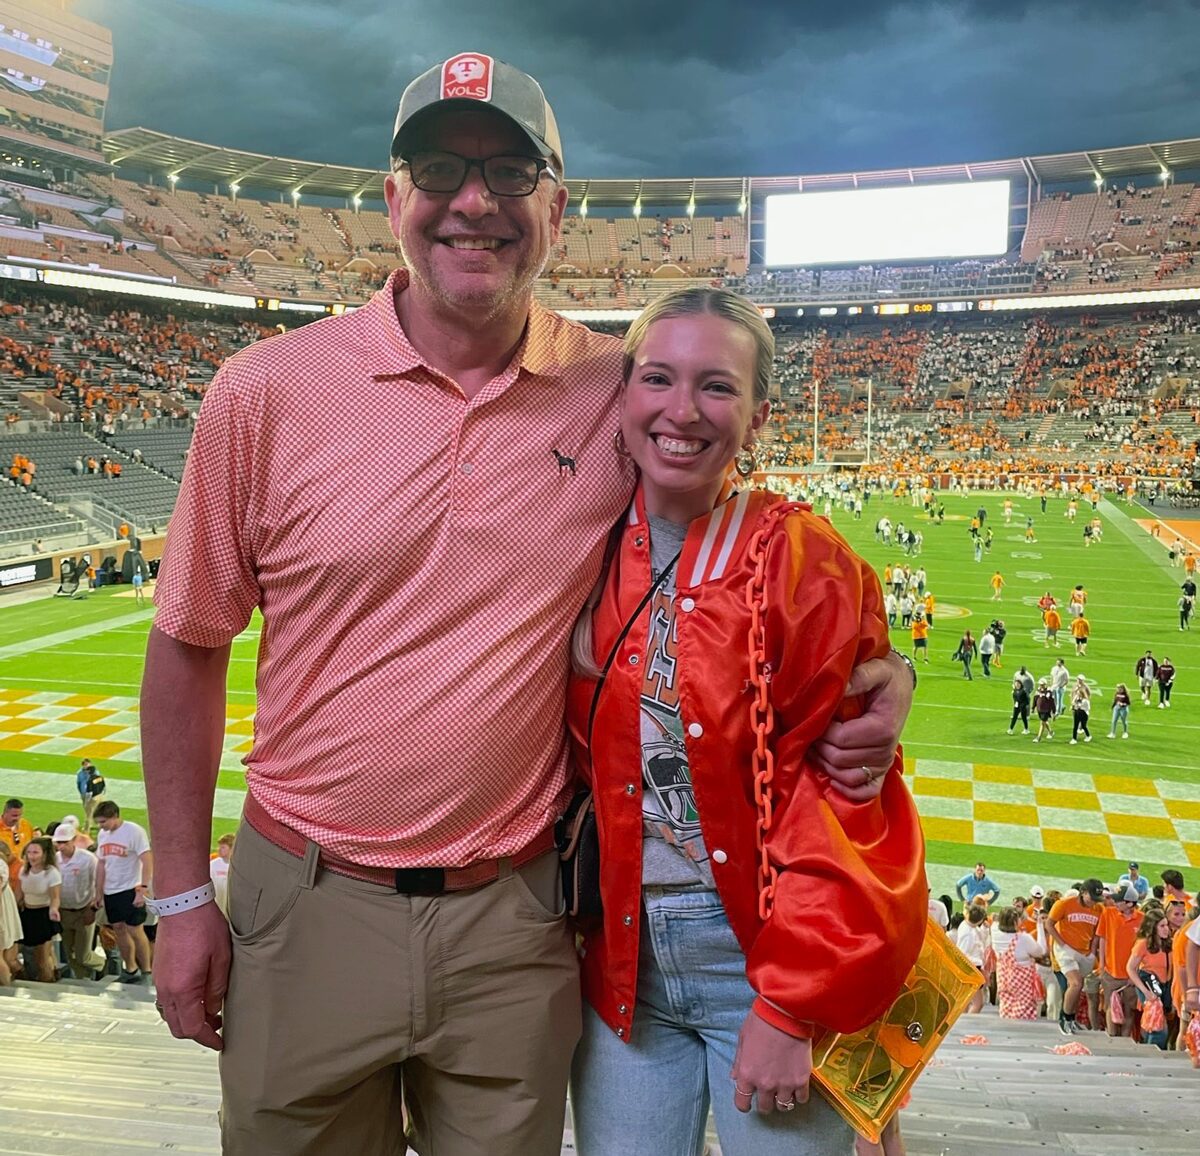 Eric Jackson and his daughter Kaitlin Shayotovich side hug in Neyland Stadium with the field and seats in the background behind them.